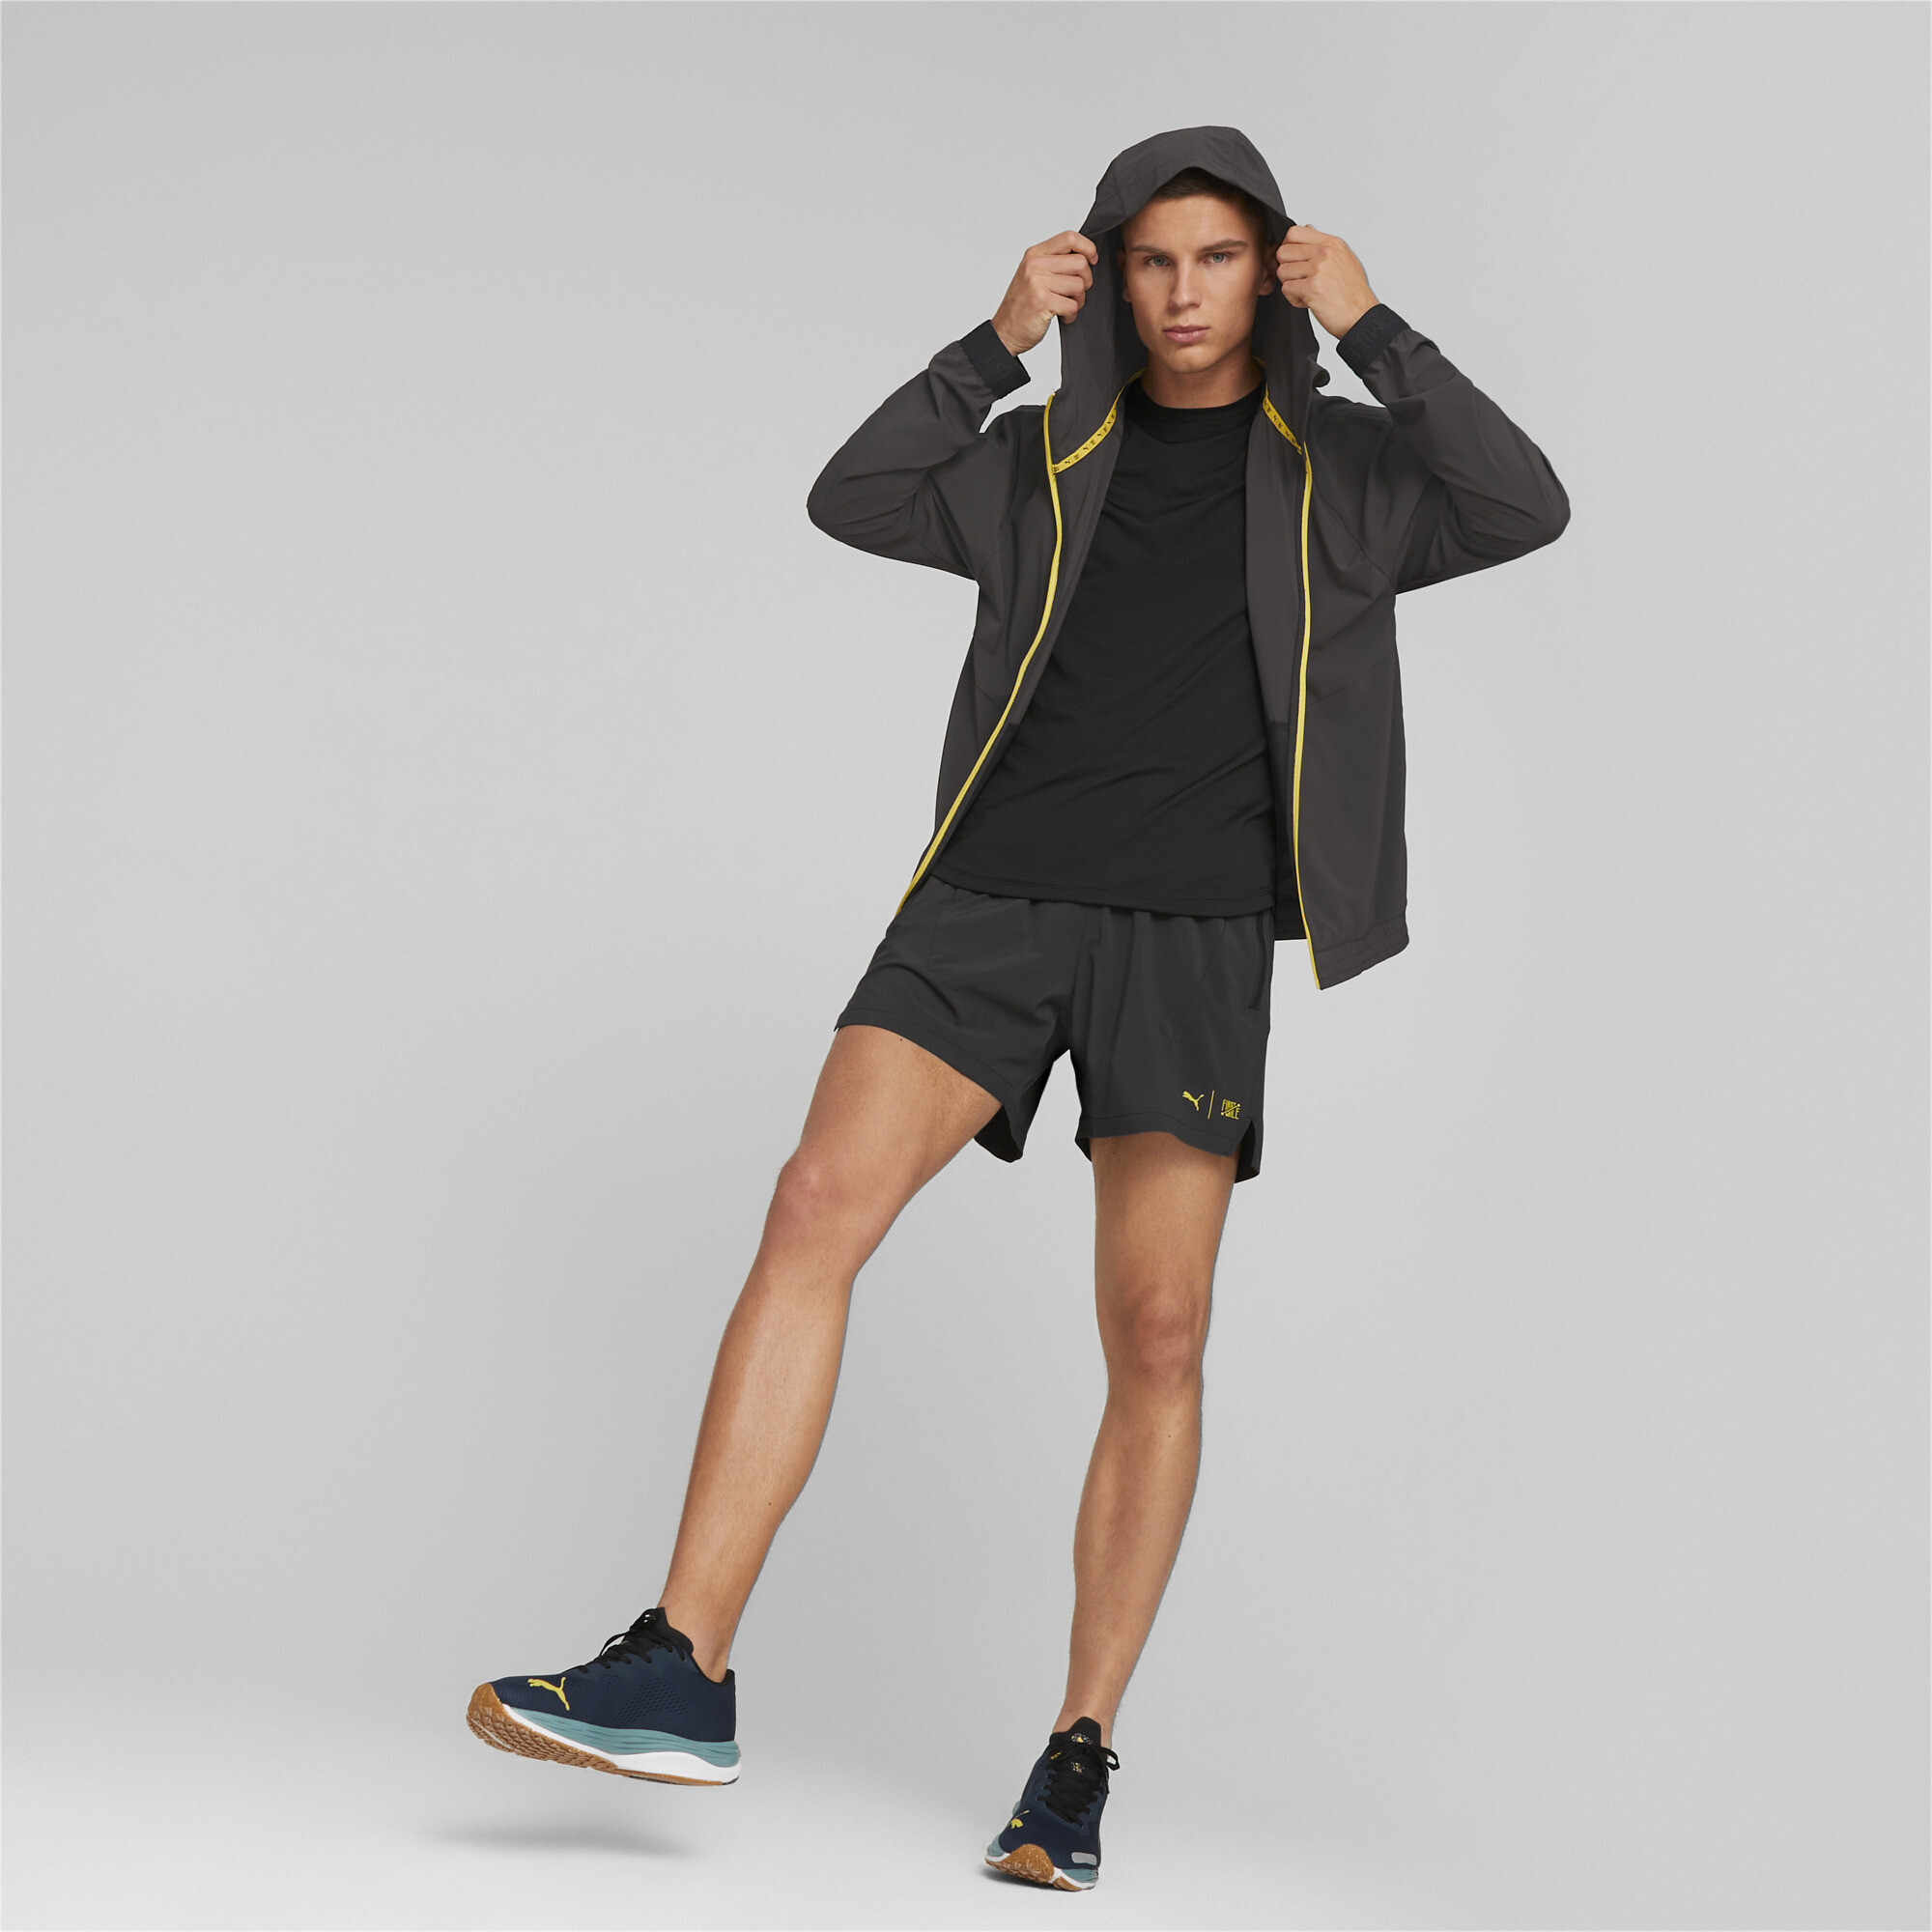 Men's PUMA X First Mile Woven 5 Running Shorts Men In Black, Size Large